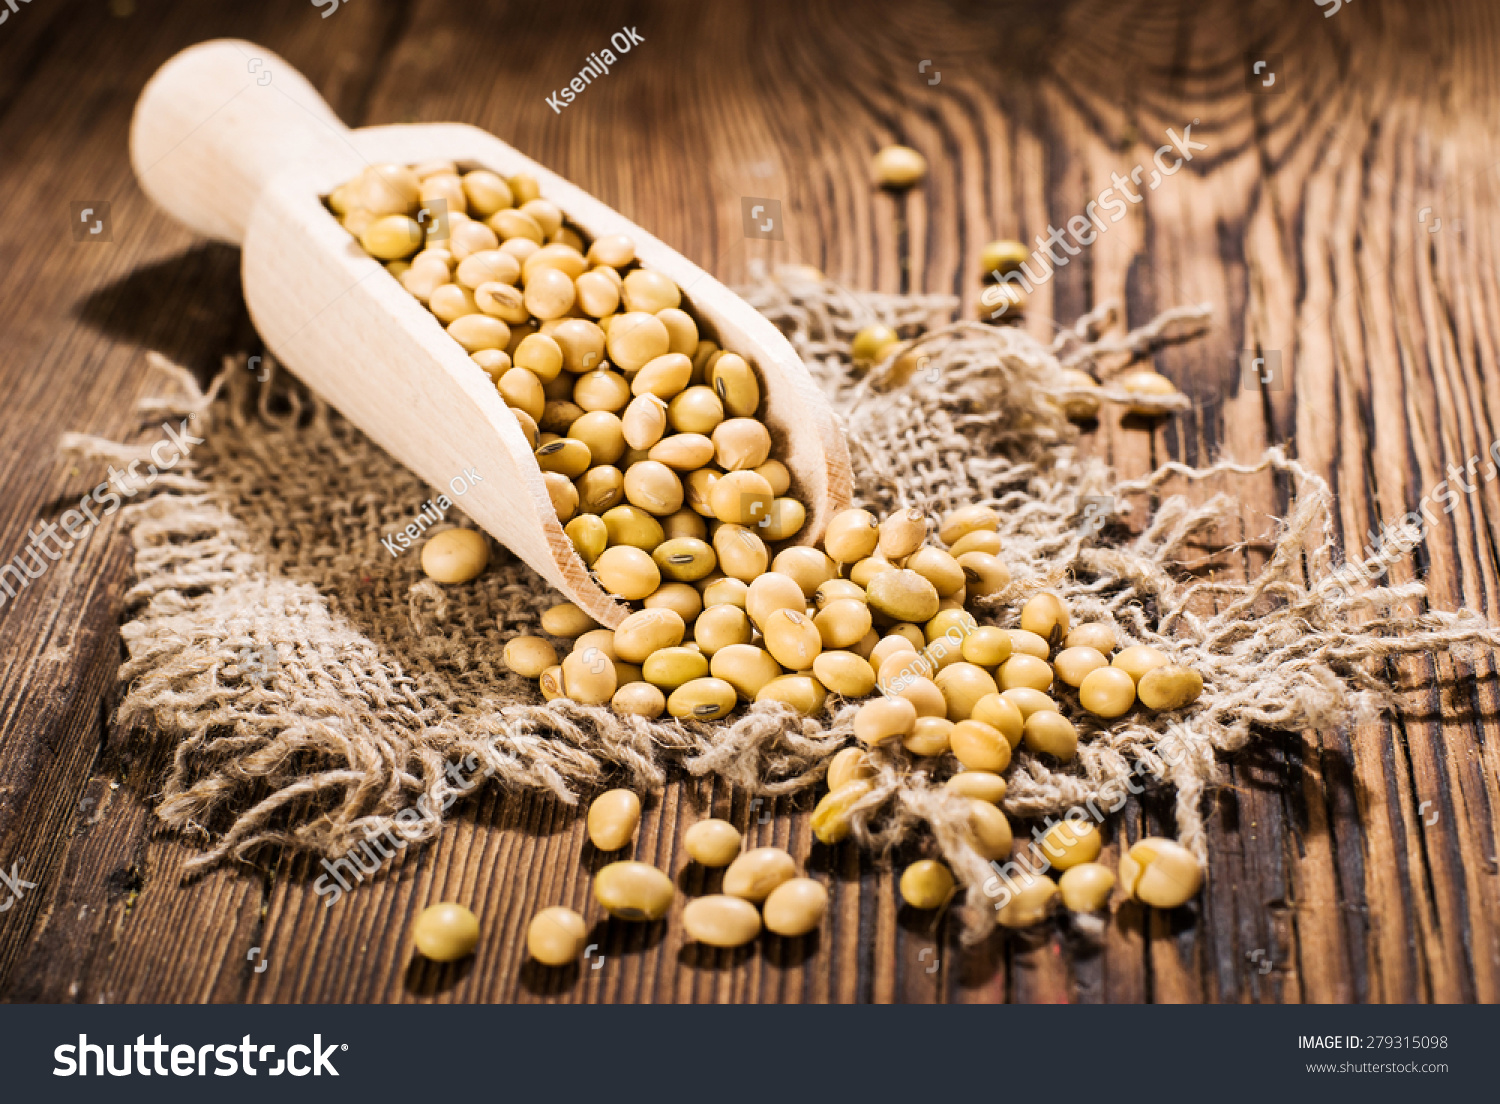 Soybeans on a wooden background.  rustic style #279315098